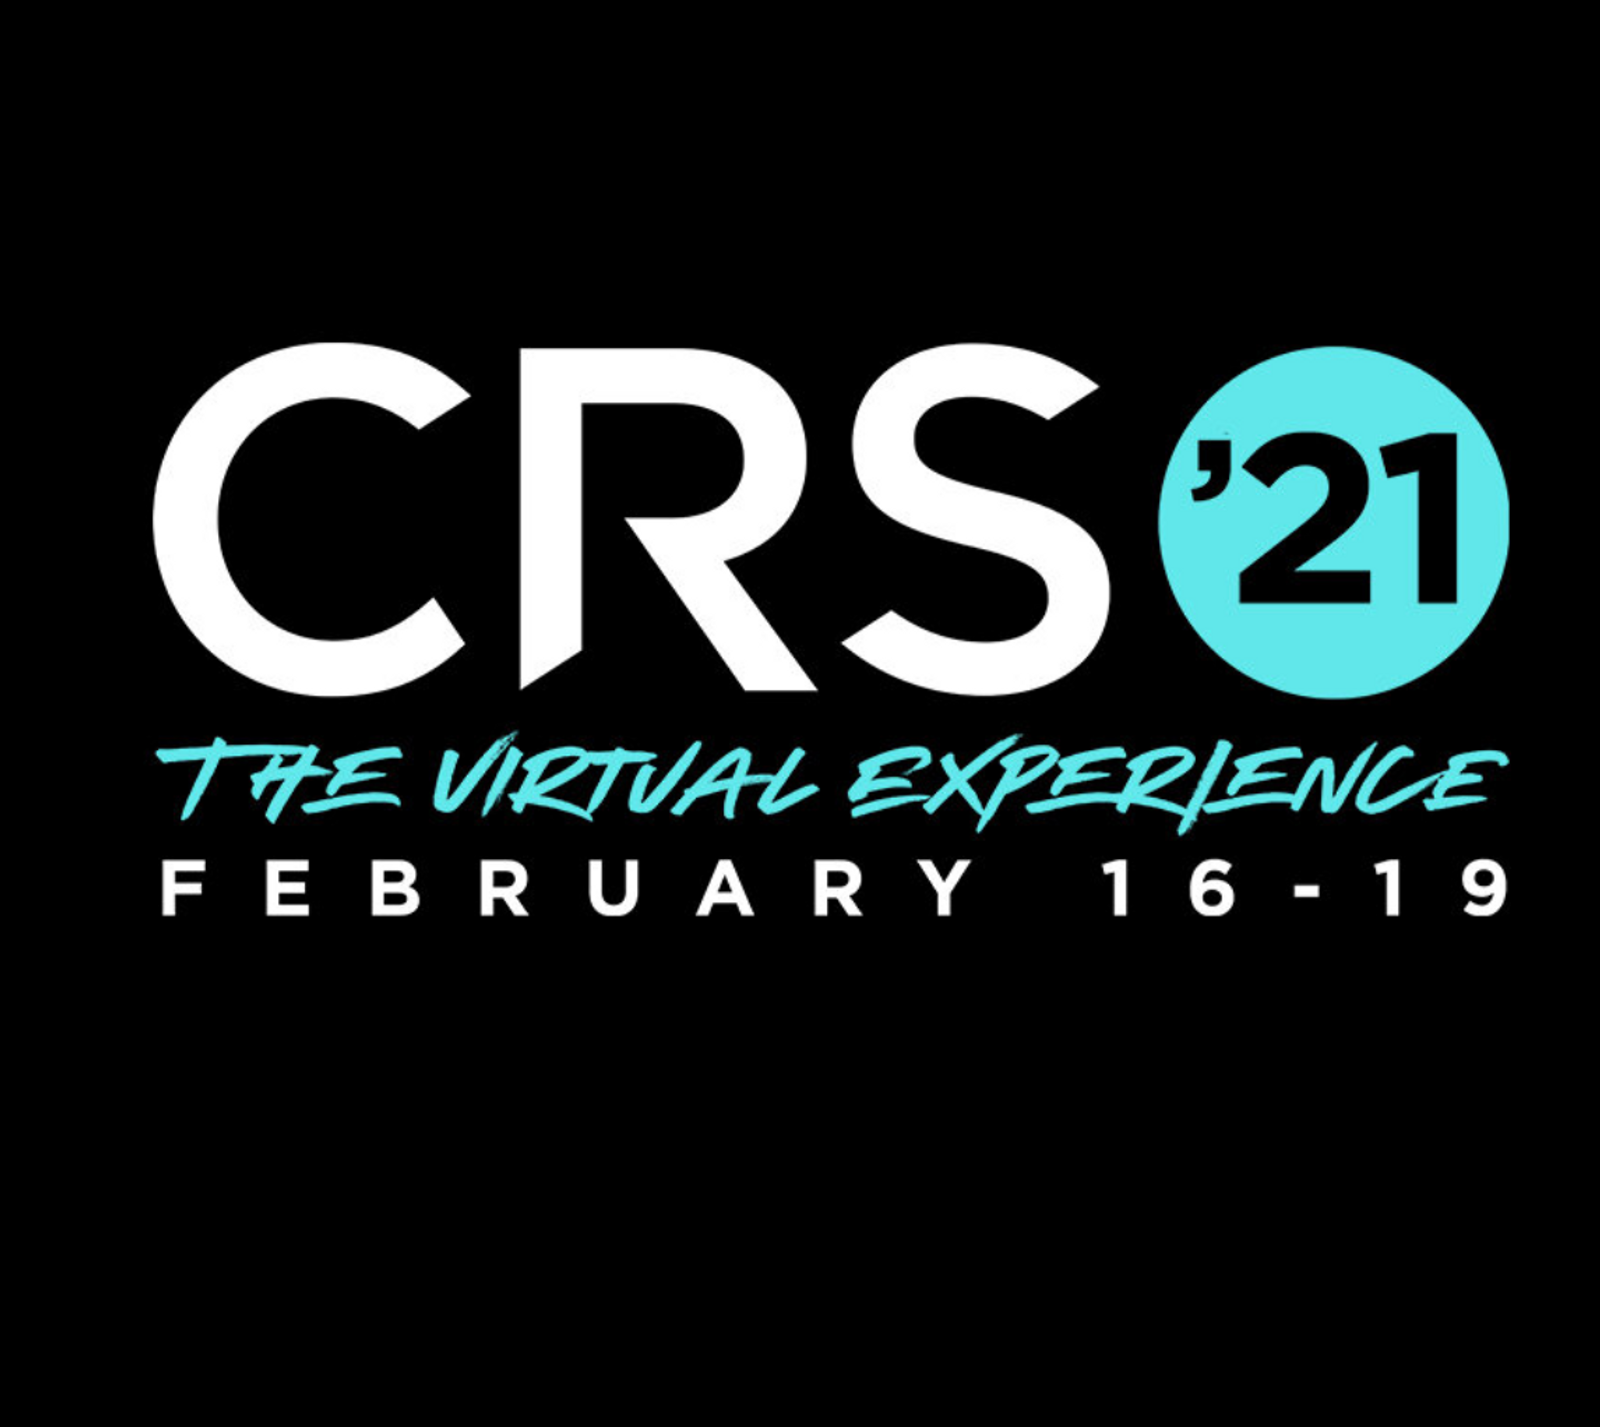 CRS 2021: The Virtual Experience